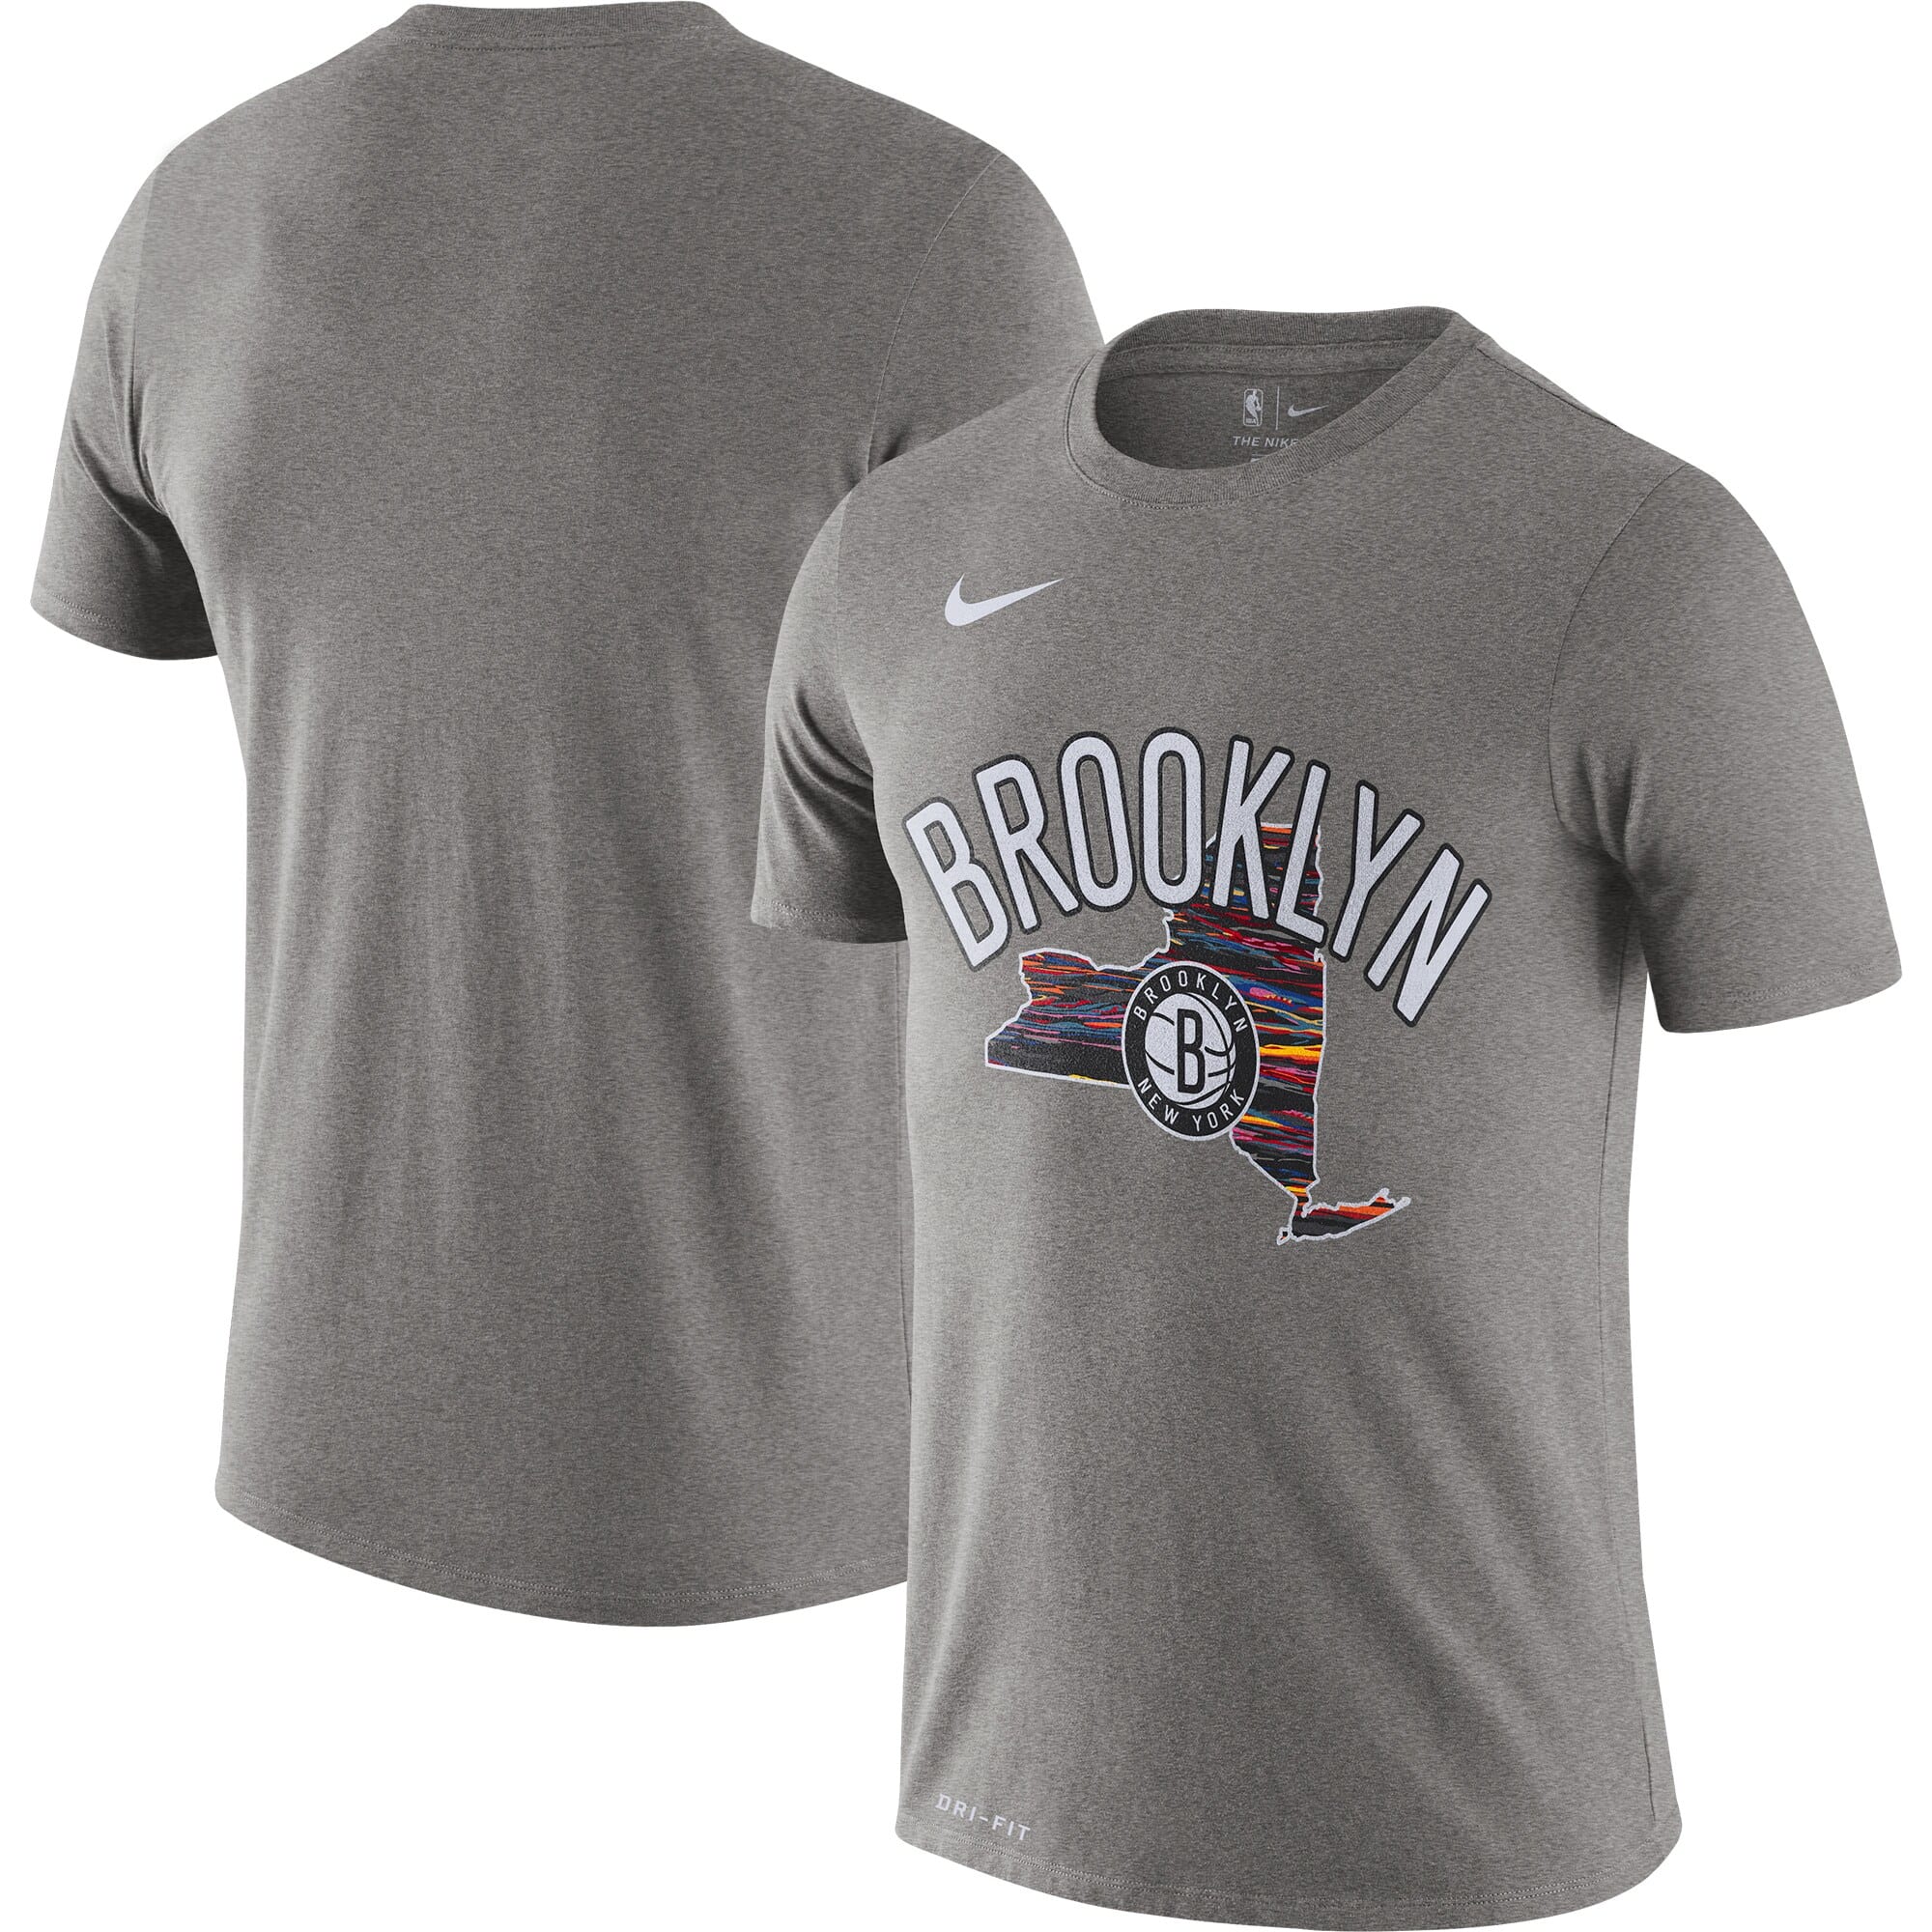 Father's Day gifts for the Brooklyn Nets fan